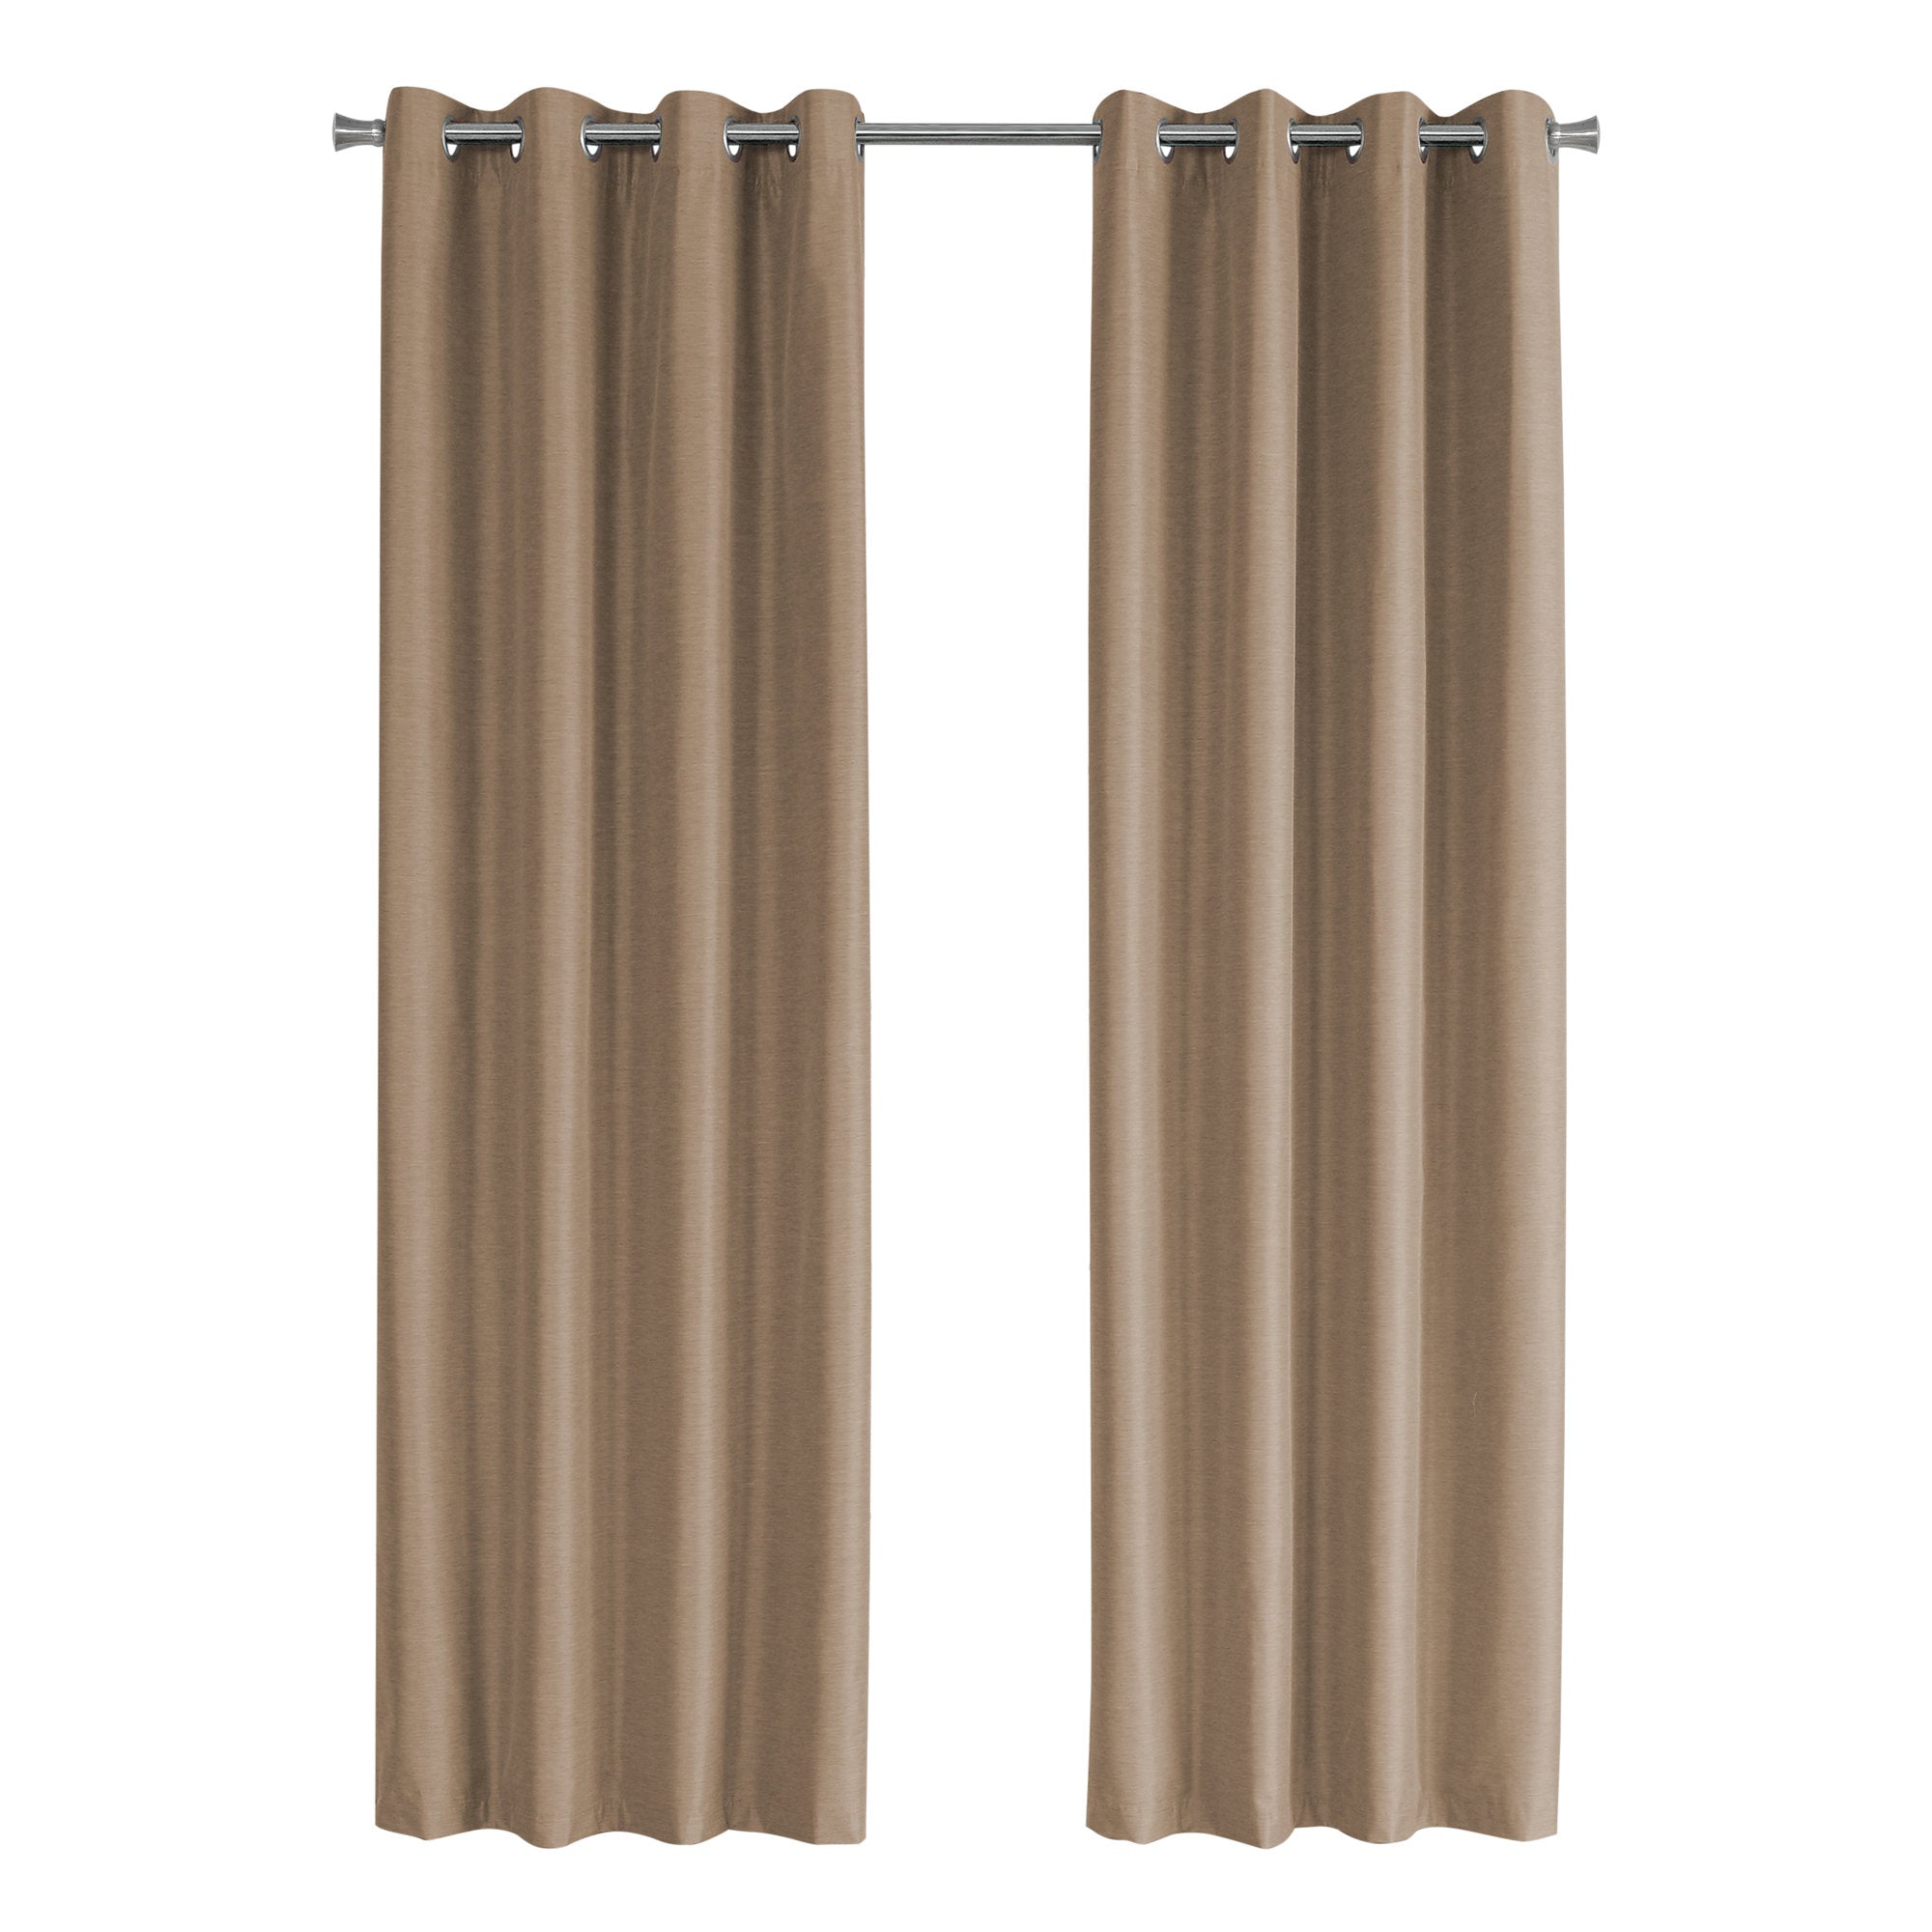 Curtain Panel - 2Pcs / 52W X 95H Brown Solid Blackout